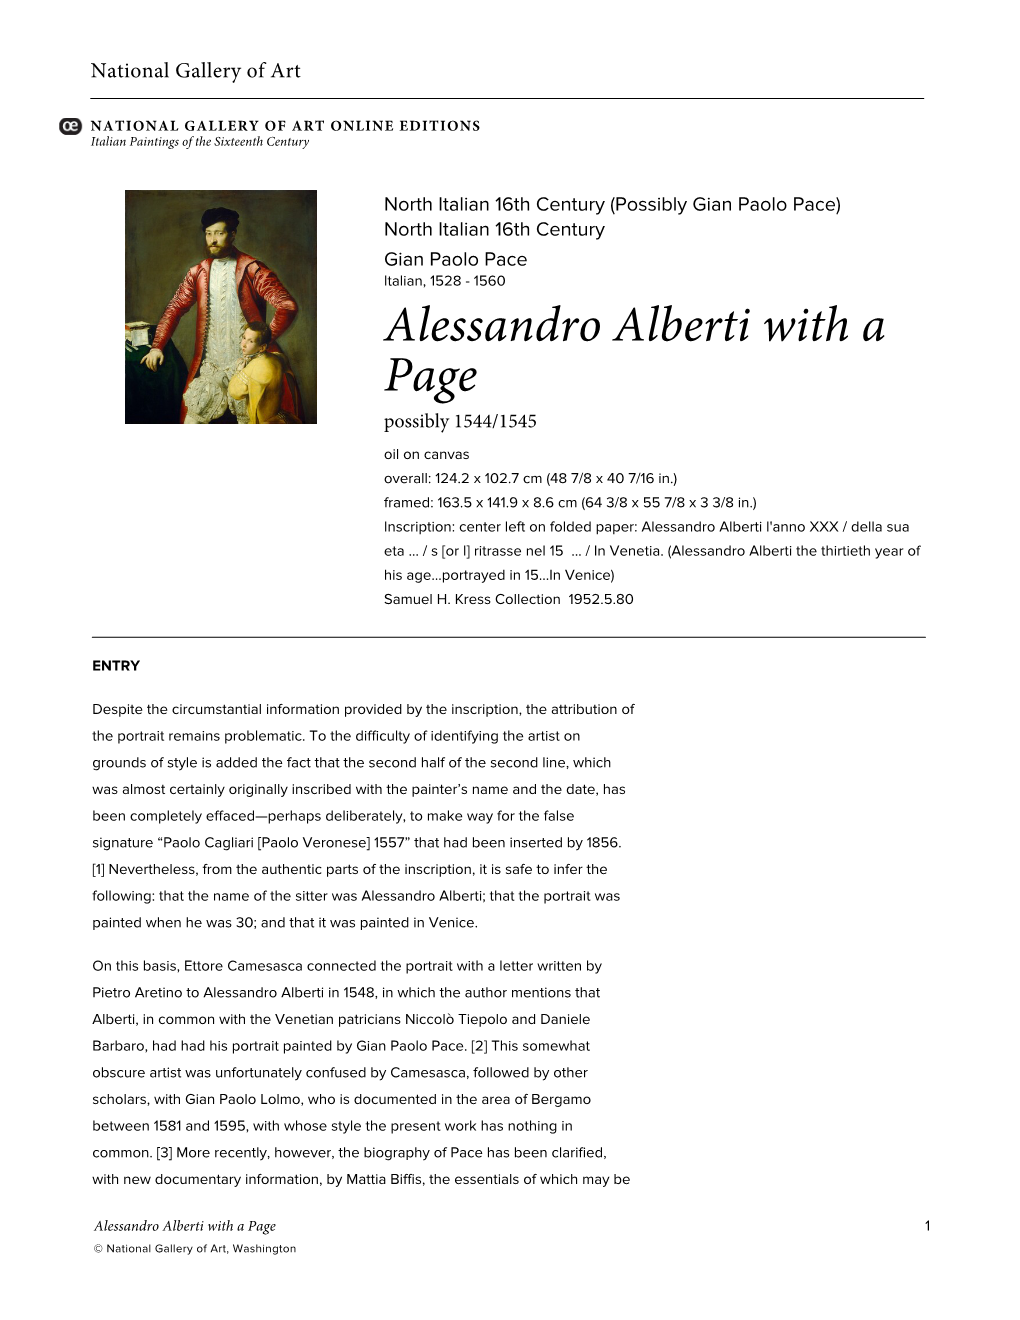 Alessandro Alberti with a Page